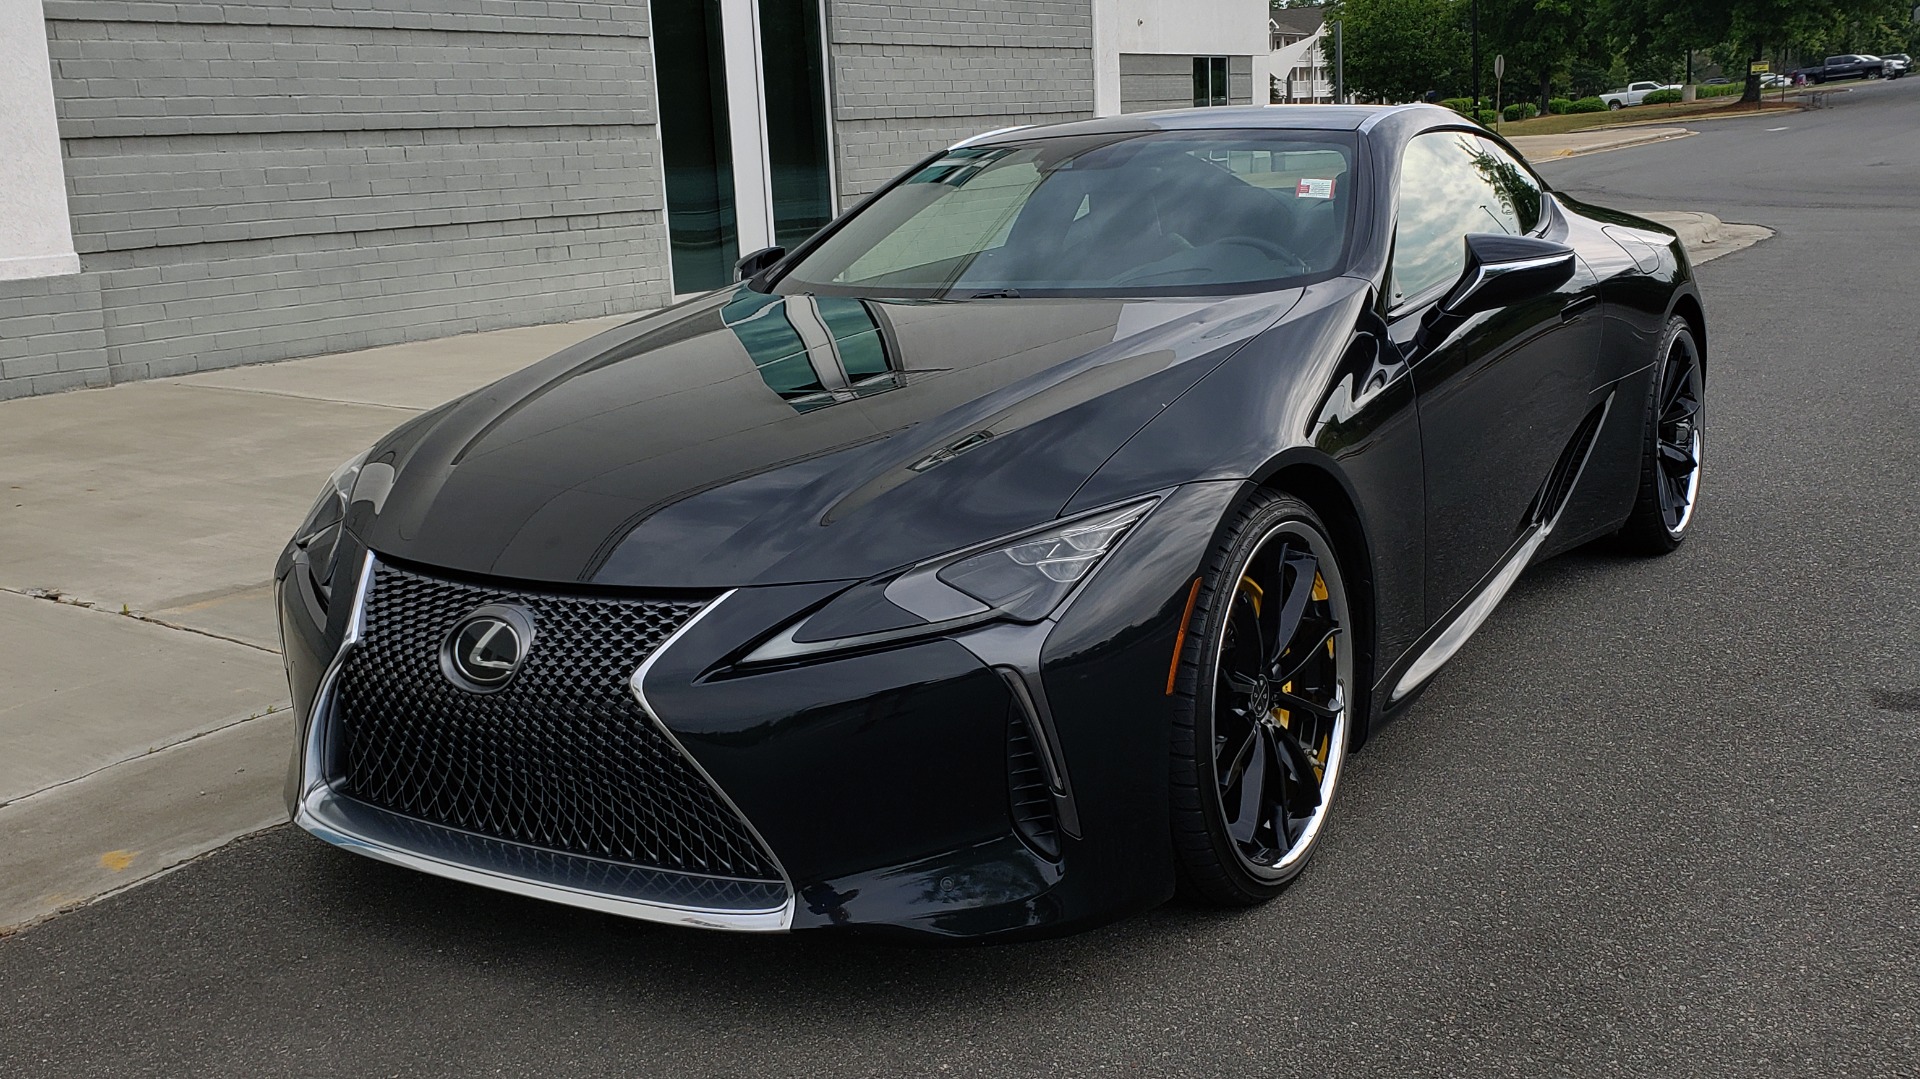 Used 2018 Lexus LC 500 COUPE / 5.0L V8 (471HP) / 10-SPD AUTO / HUD / SUNROOF / REARVIEW for sale Sold at Formula Imports in Charlotte NC 28227 5